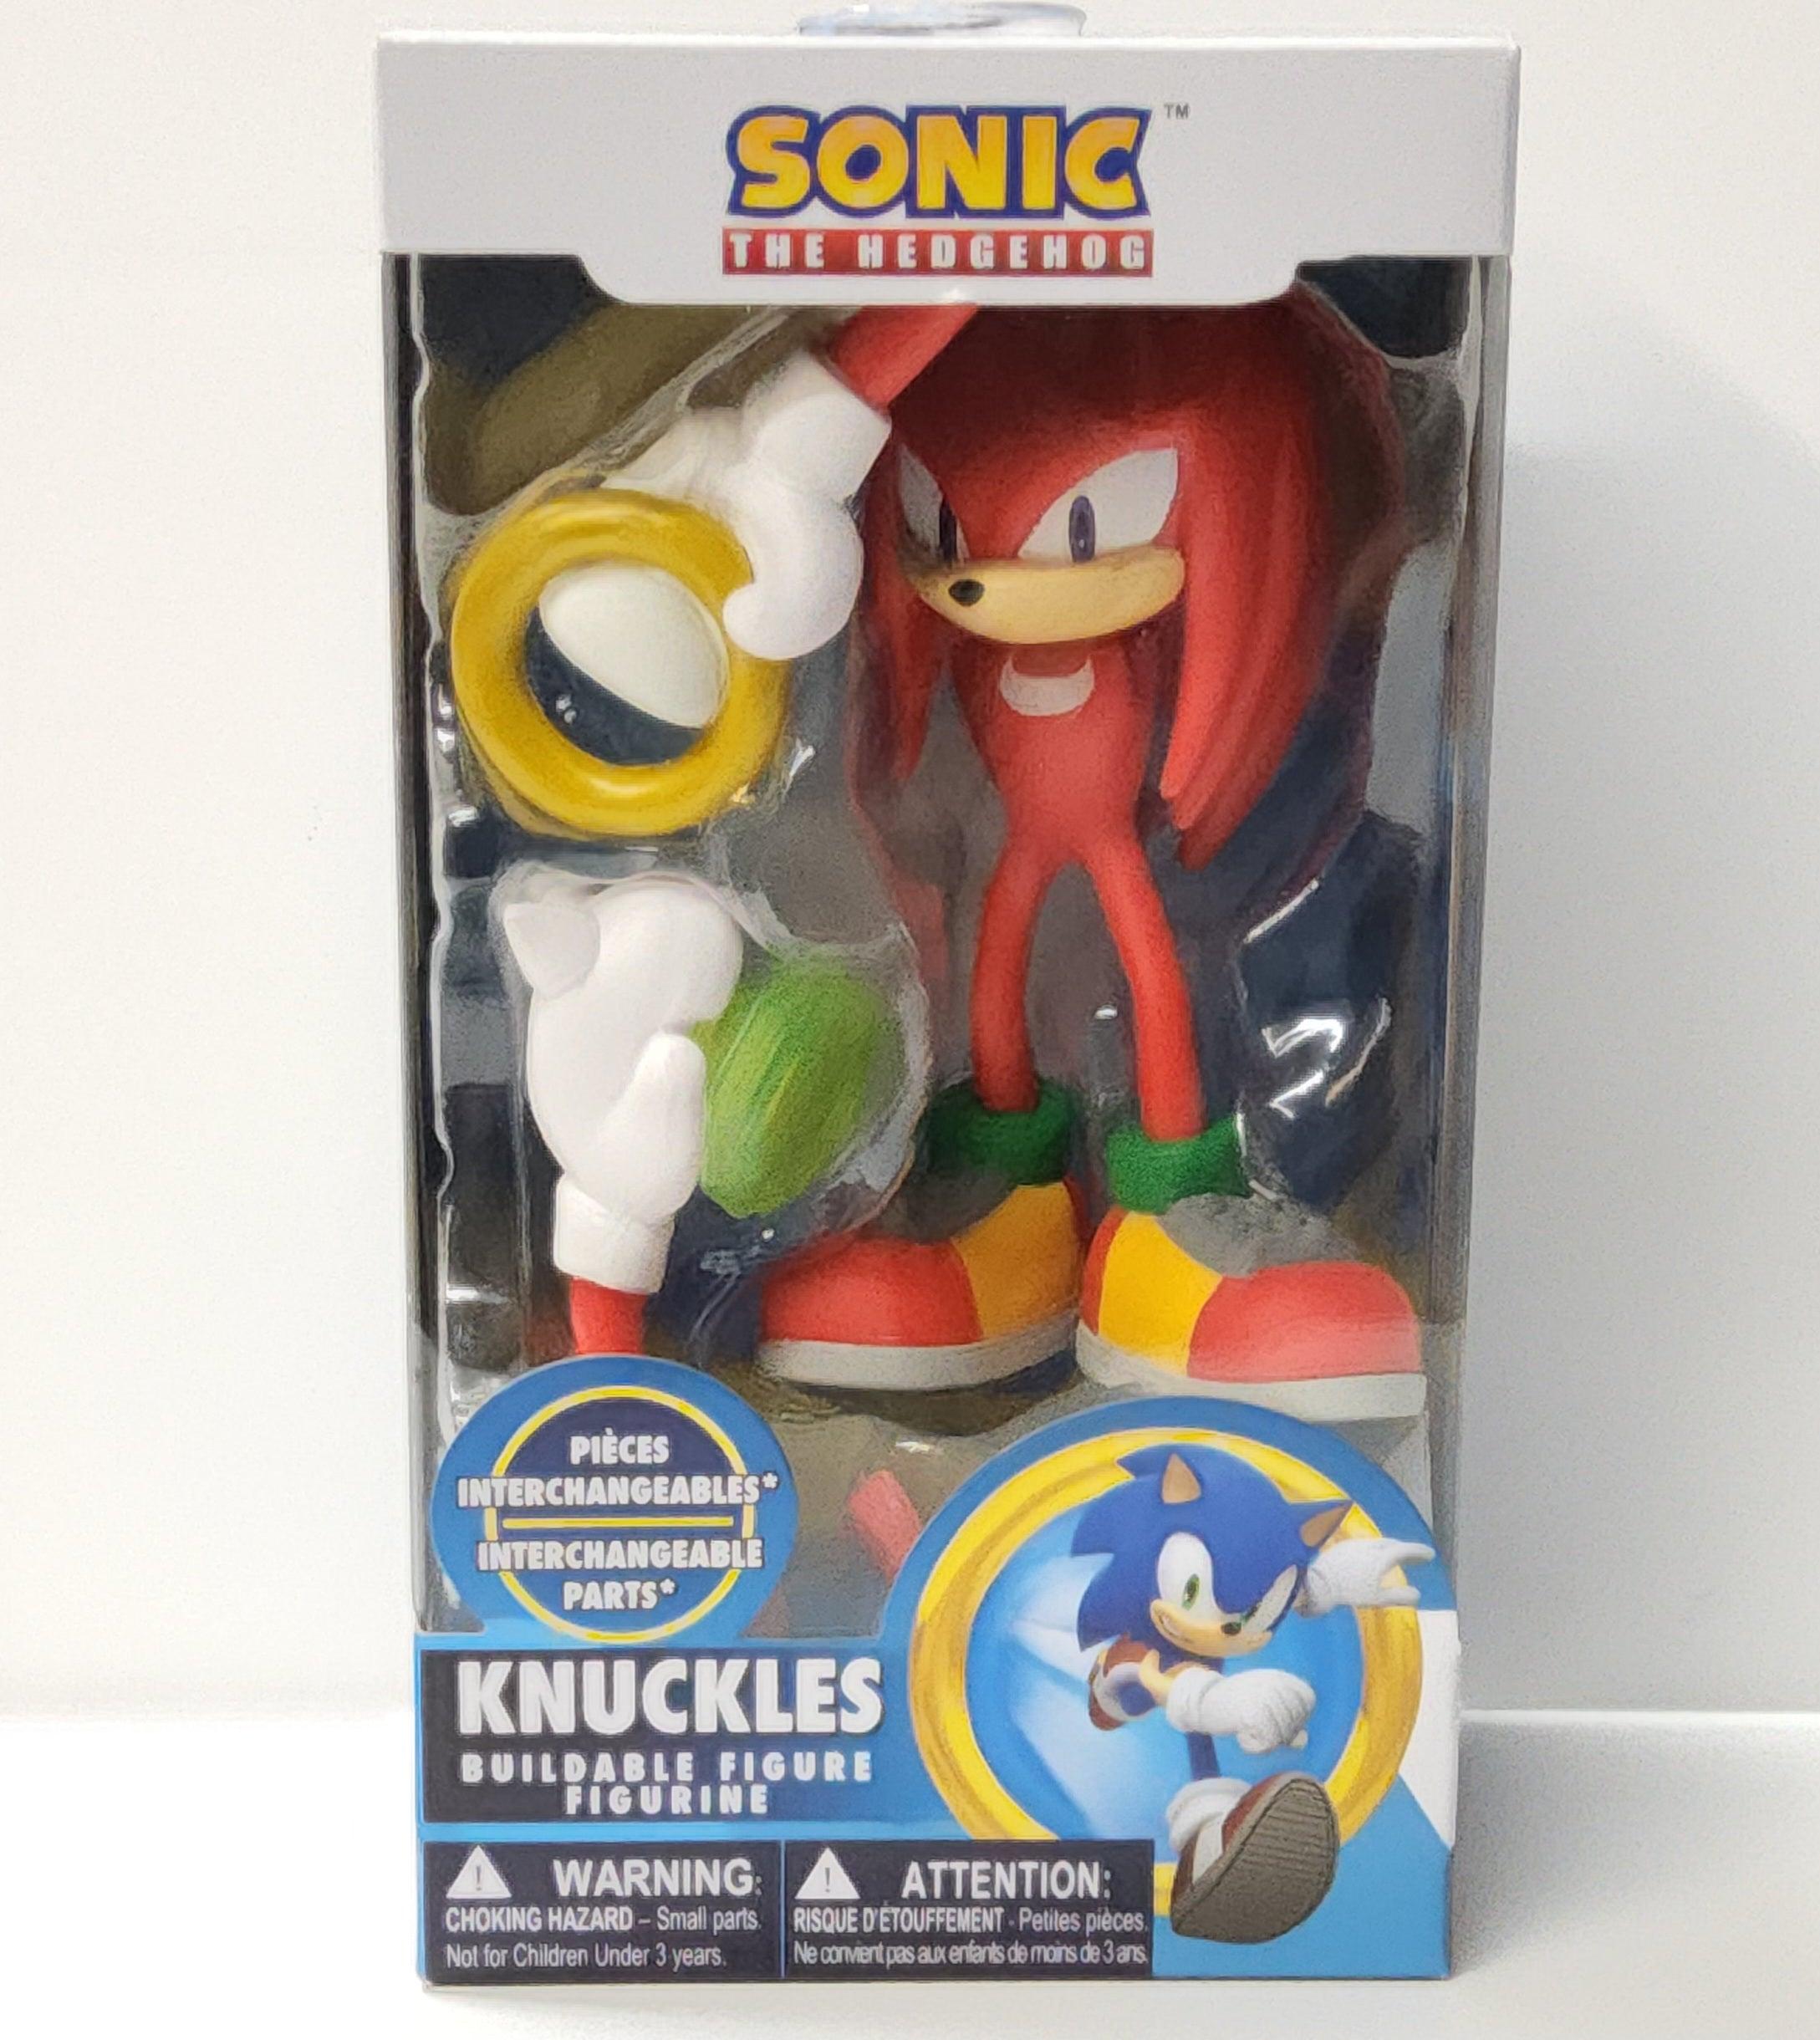 Just Toys INTL Sonic the Hedgehog Knuckles Buildable Figure Figurine w